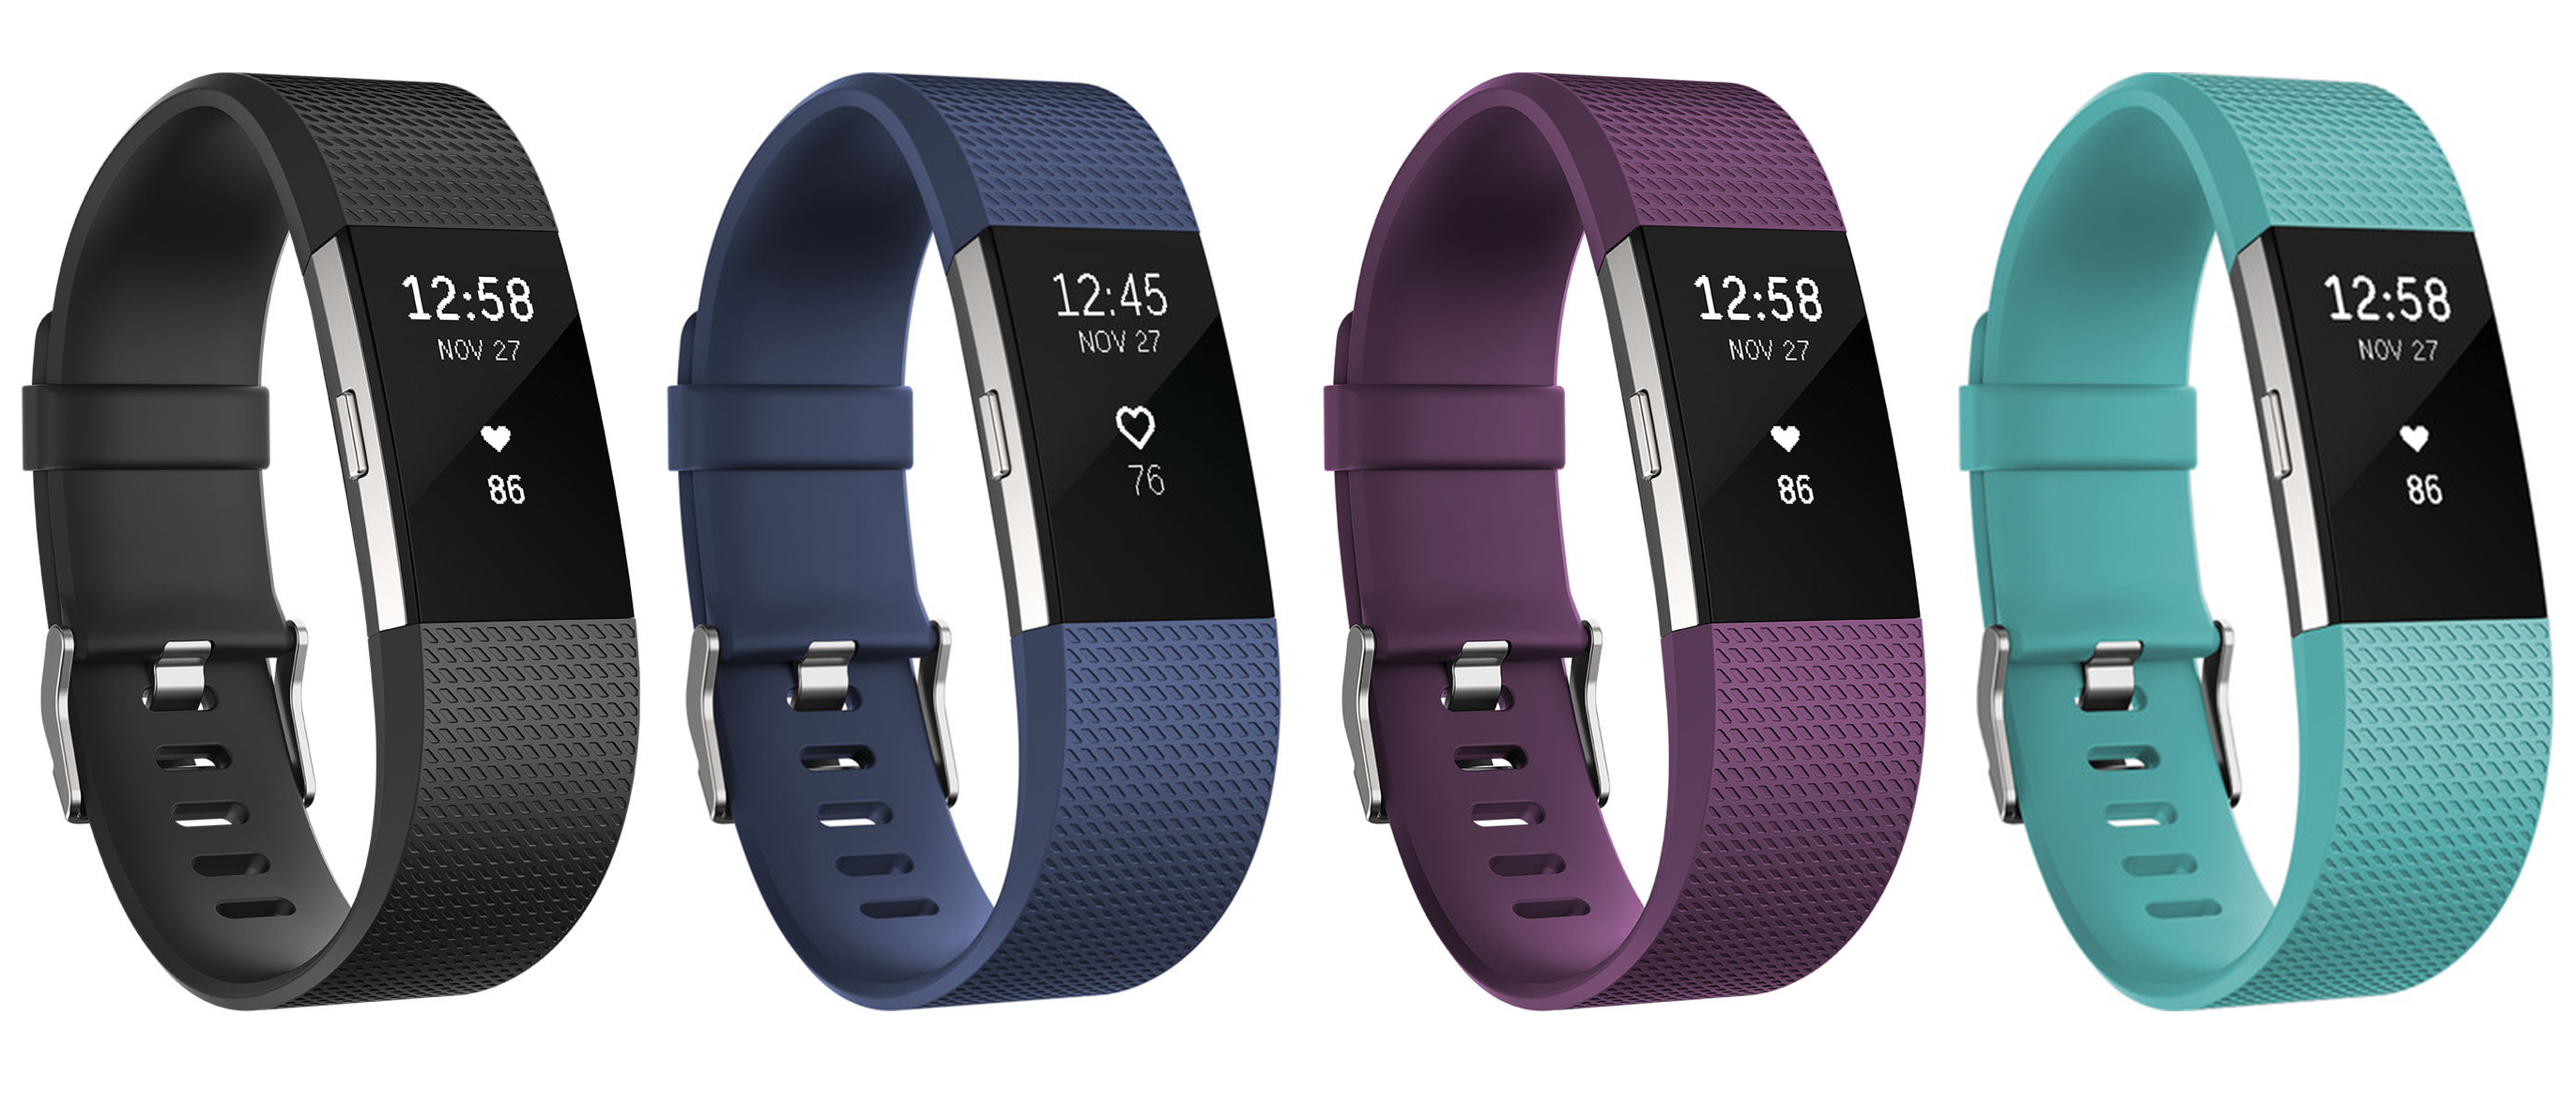 Amazon surprises with pre-order discount on the new Fitbit Charge 2: $115 (Reg. $150), Fitbit 